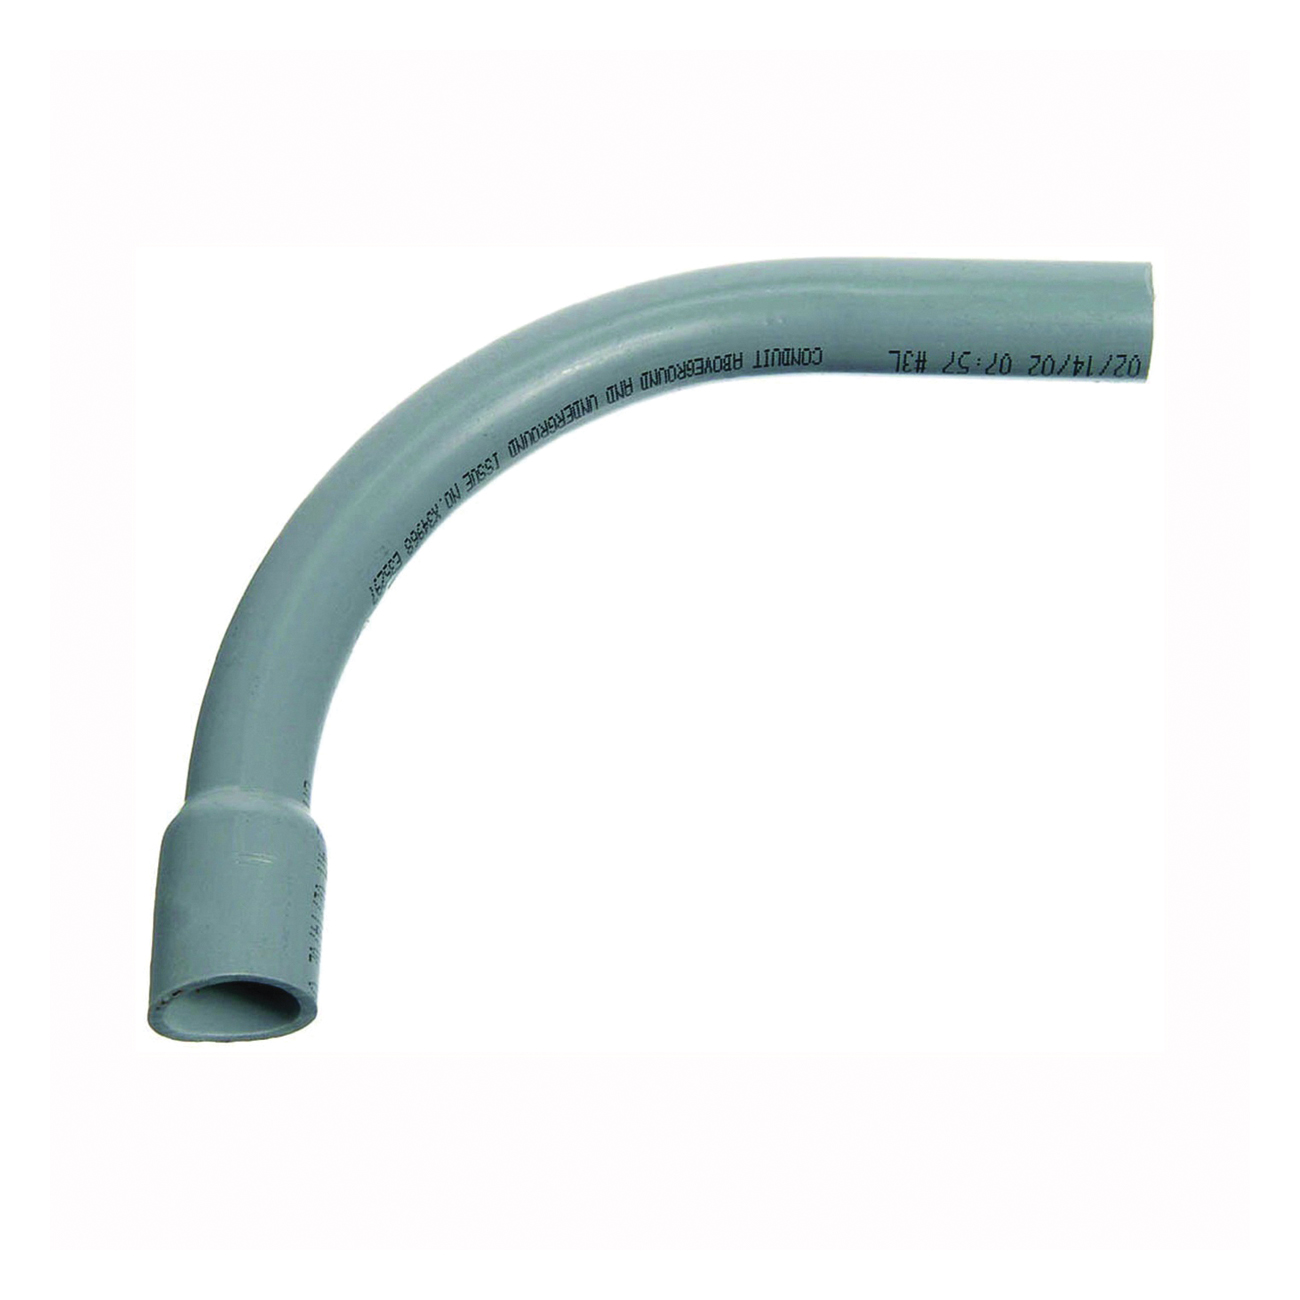 UA9AFB-CTN Elbow, 1 in Trade Size, 90 deg Angle, SCH 80 Schedule Rating, PVC, Bell End, Gray